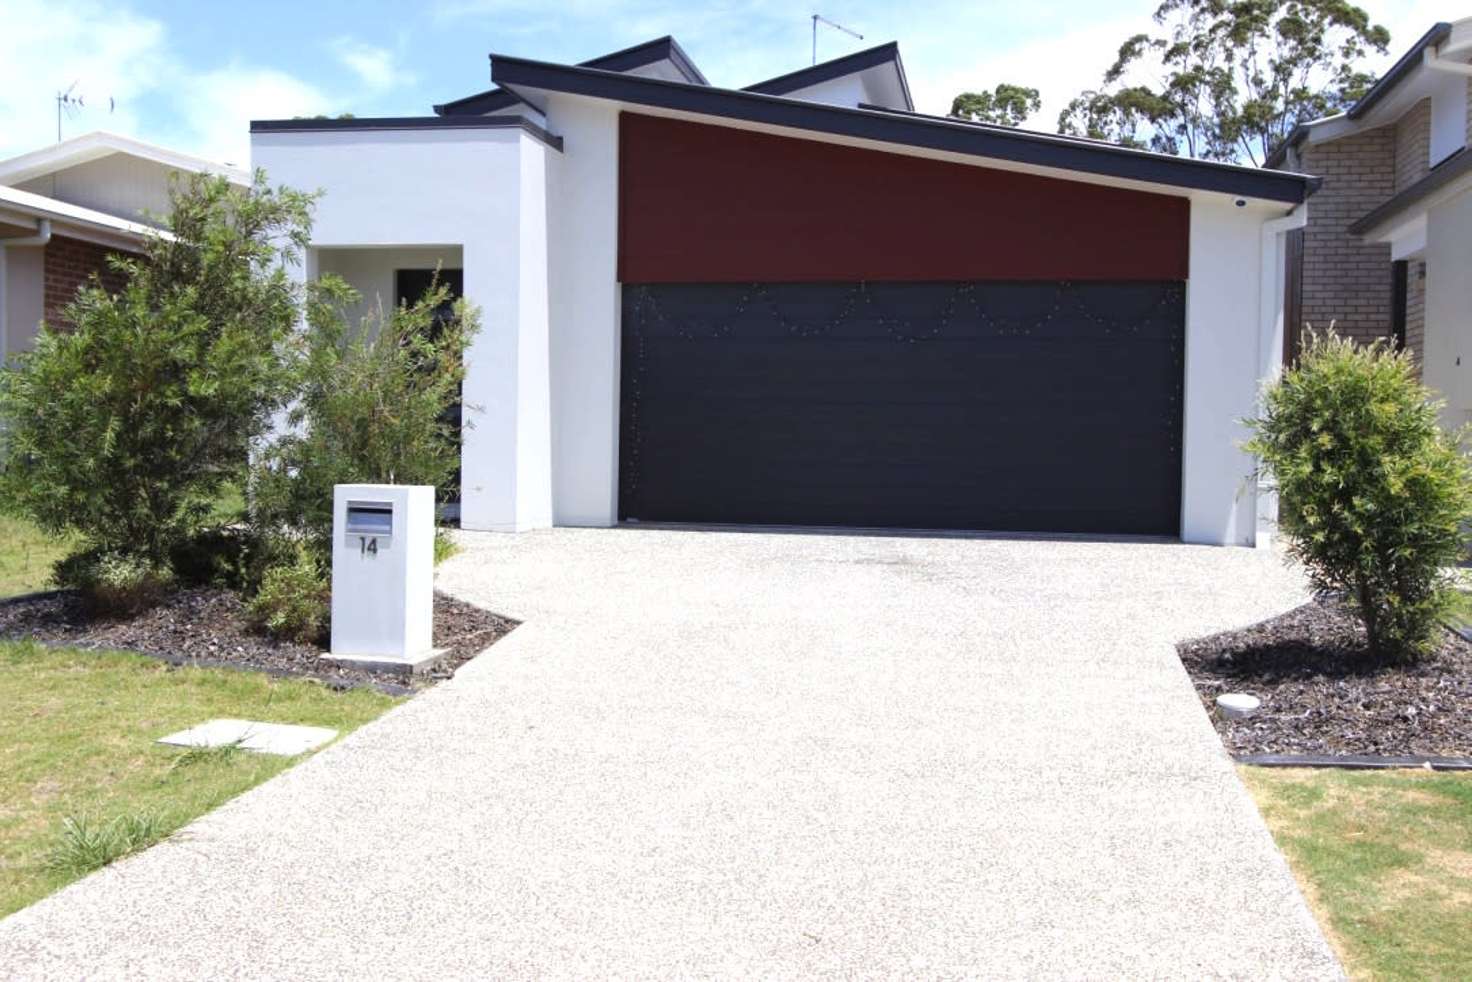 Main view of Homely house listing, 14 Gunther Ave, Coomera QLD 4209